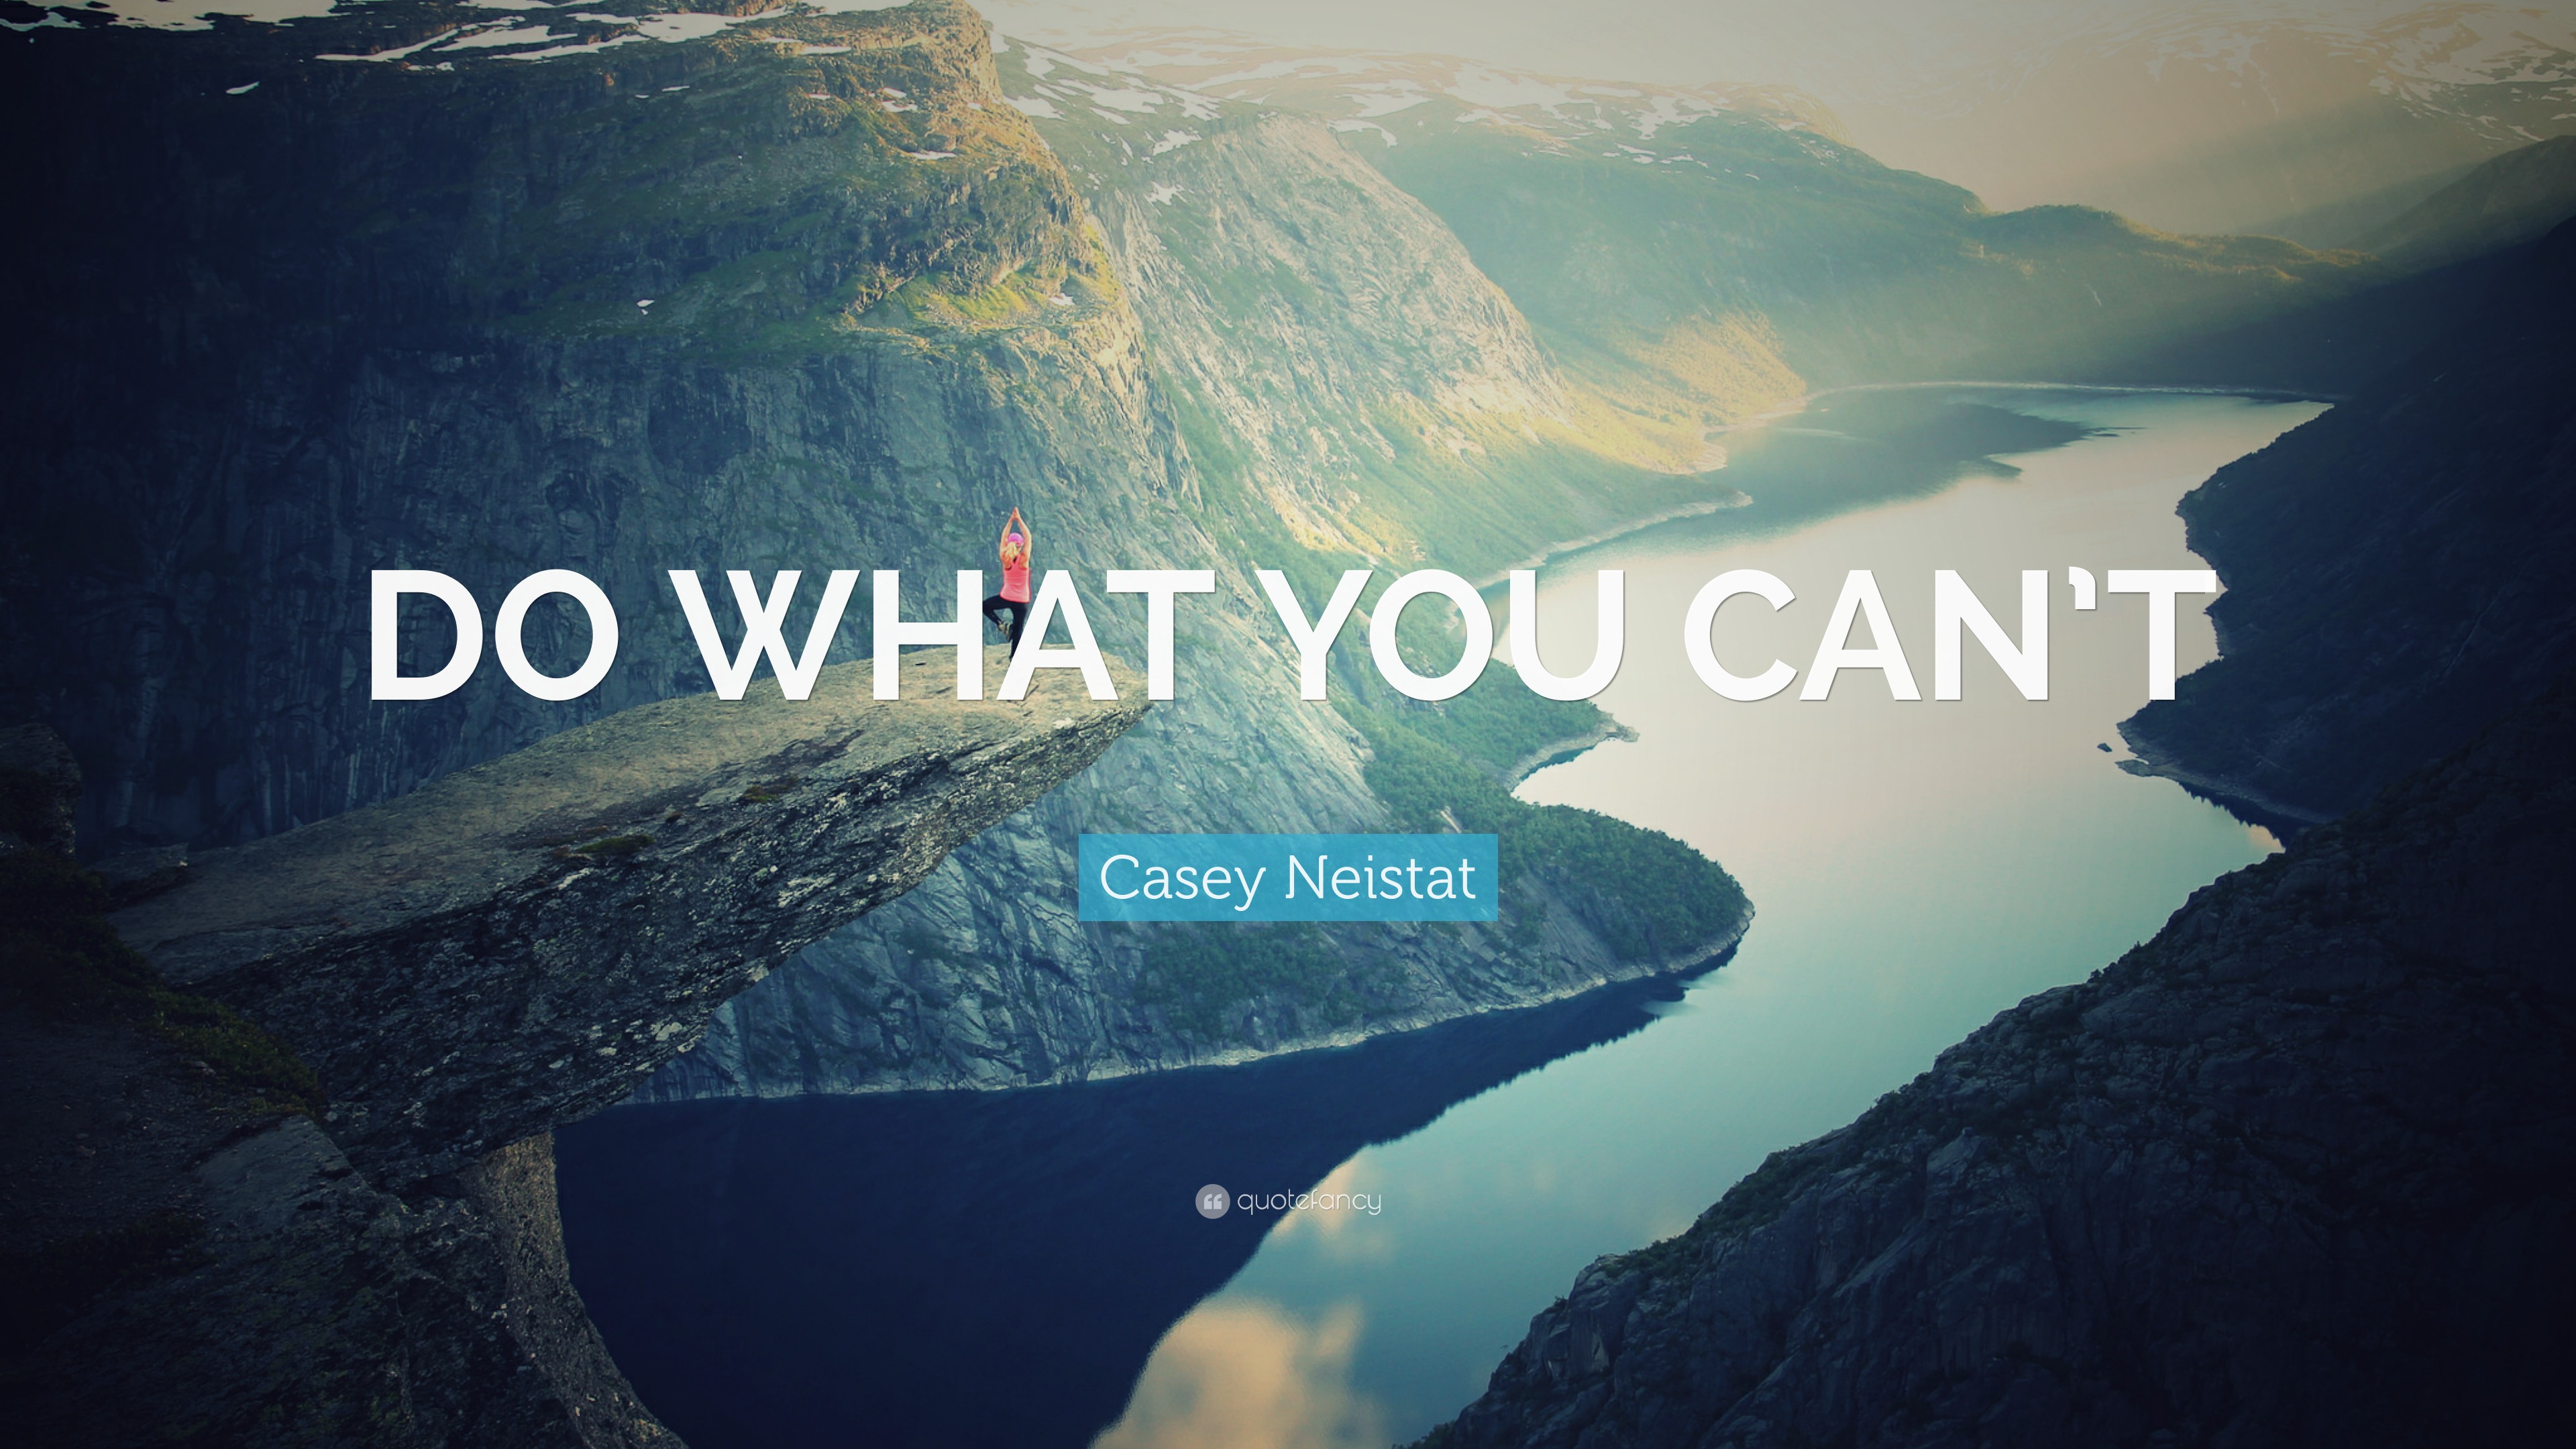 Casey Neistat Quote: "DO WHAT YOU CAN’T" .